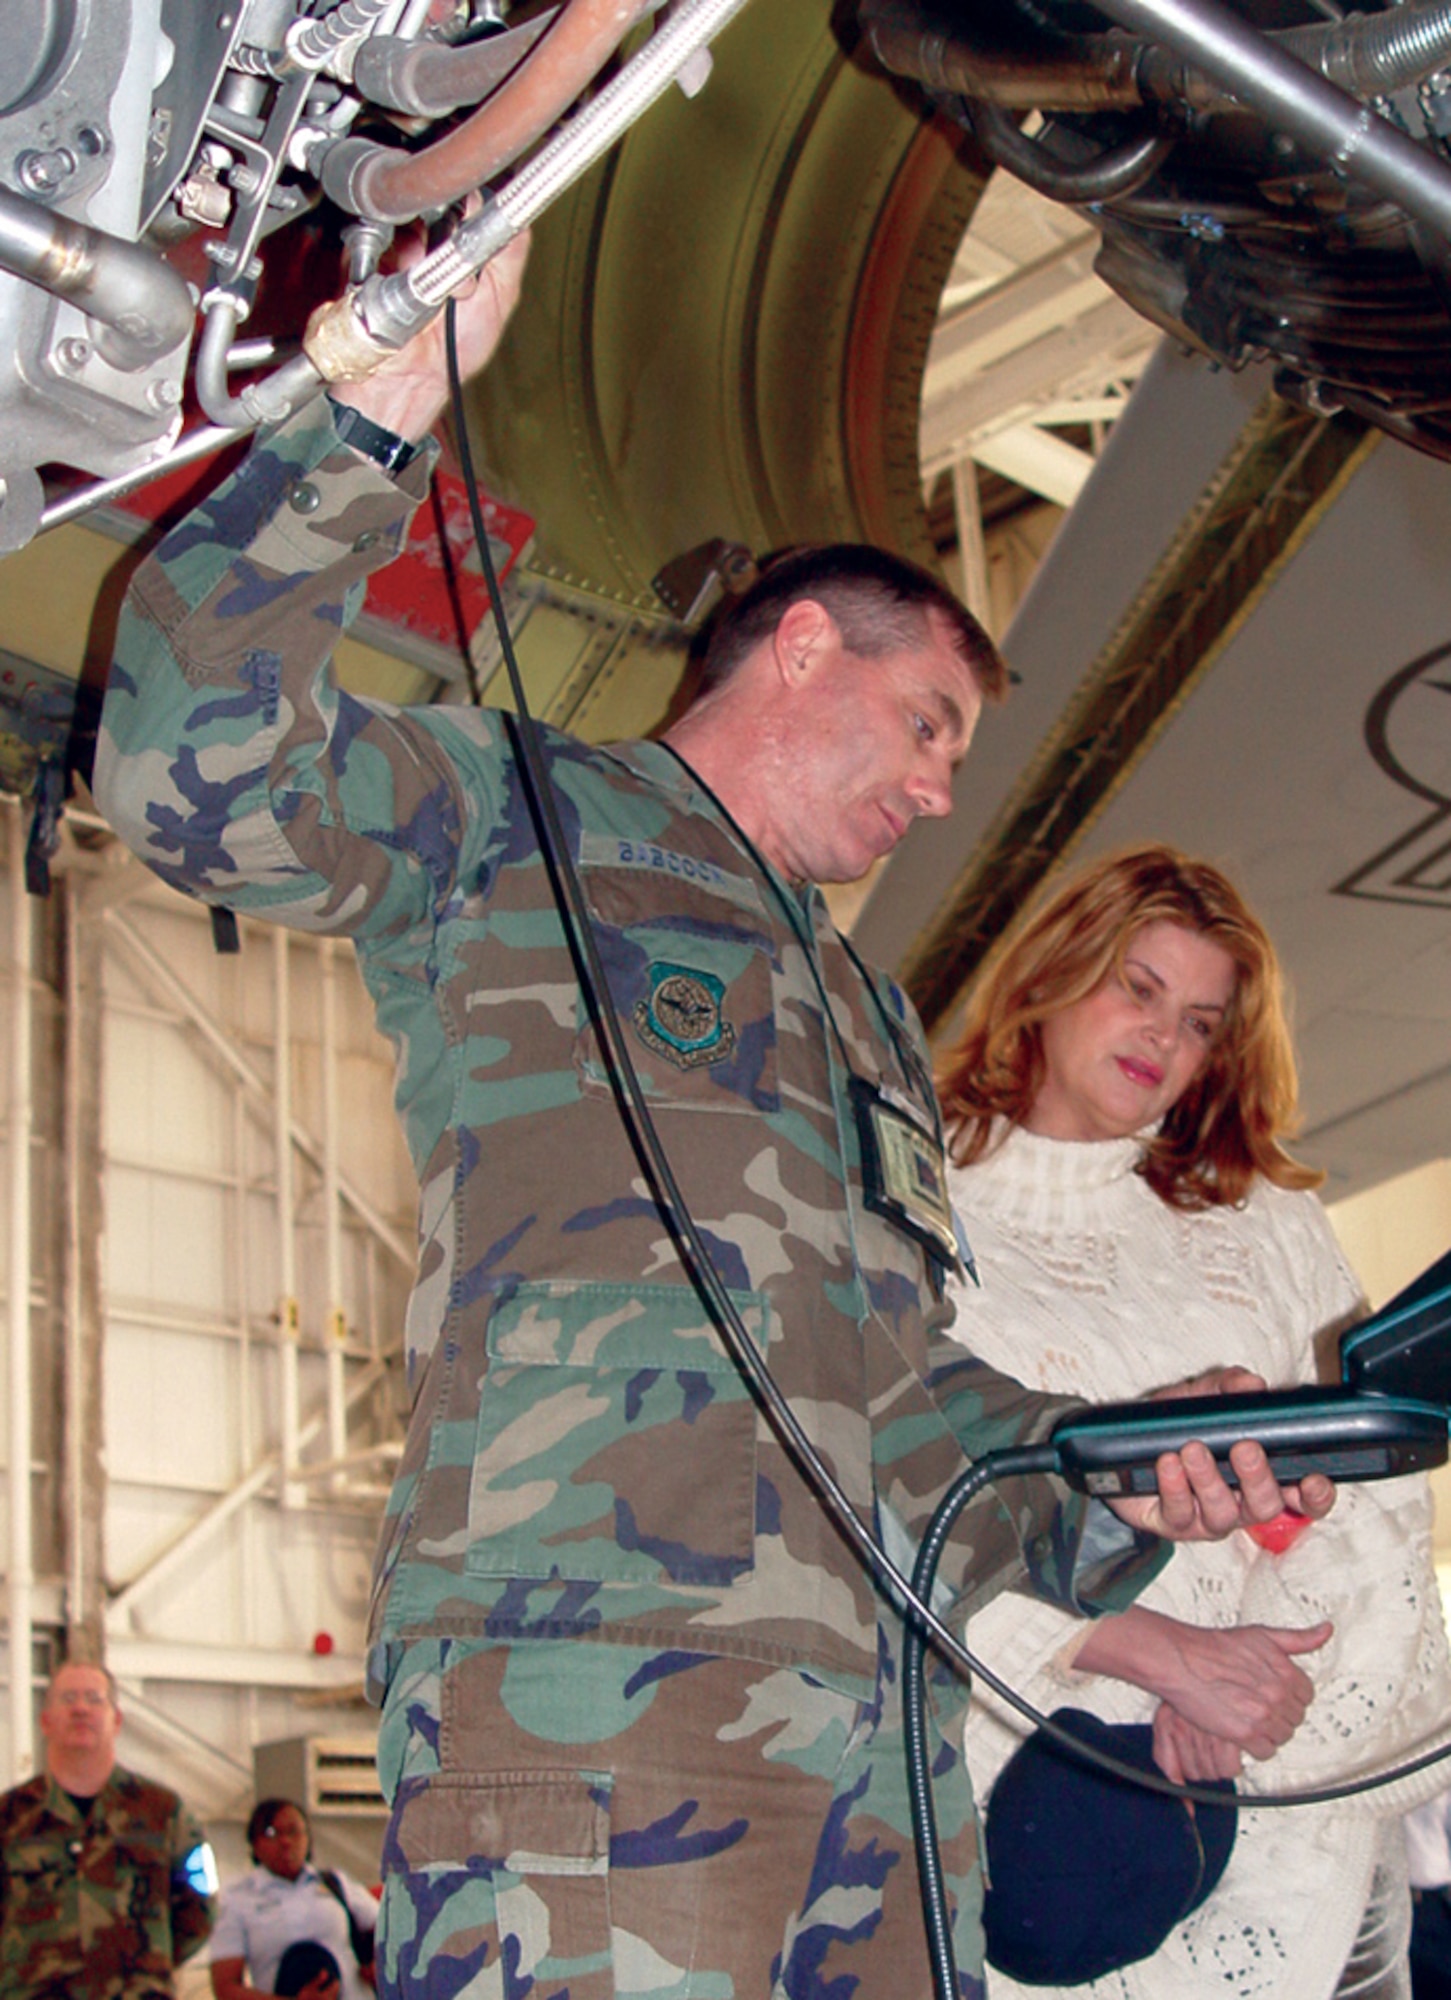 MCCONNELL AIR FORCE BASE, Kan. -- Master Sgt. Gary Babcock shows Golden Globe-winning actress Kirstie Alley the inner workings of the KC-135 Stratotanker engine.  Ms. Alley visited here March 8 to show her support for the troops.  Sergeant Babcock is assigned to the 22nd Maintenance Squadron here.  (U.S. Air Force photo by Airman 1st Class Harold Barnes III)